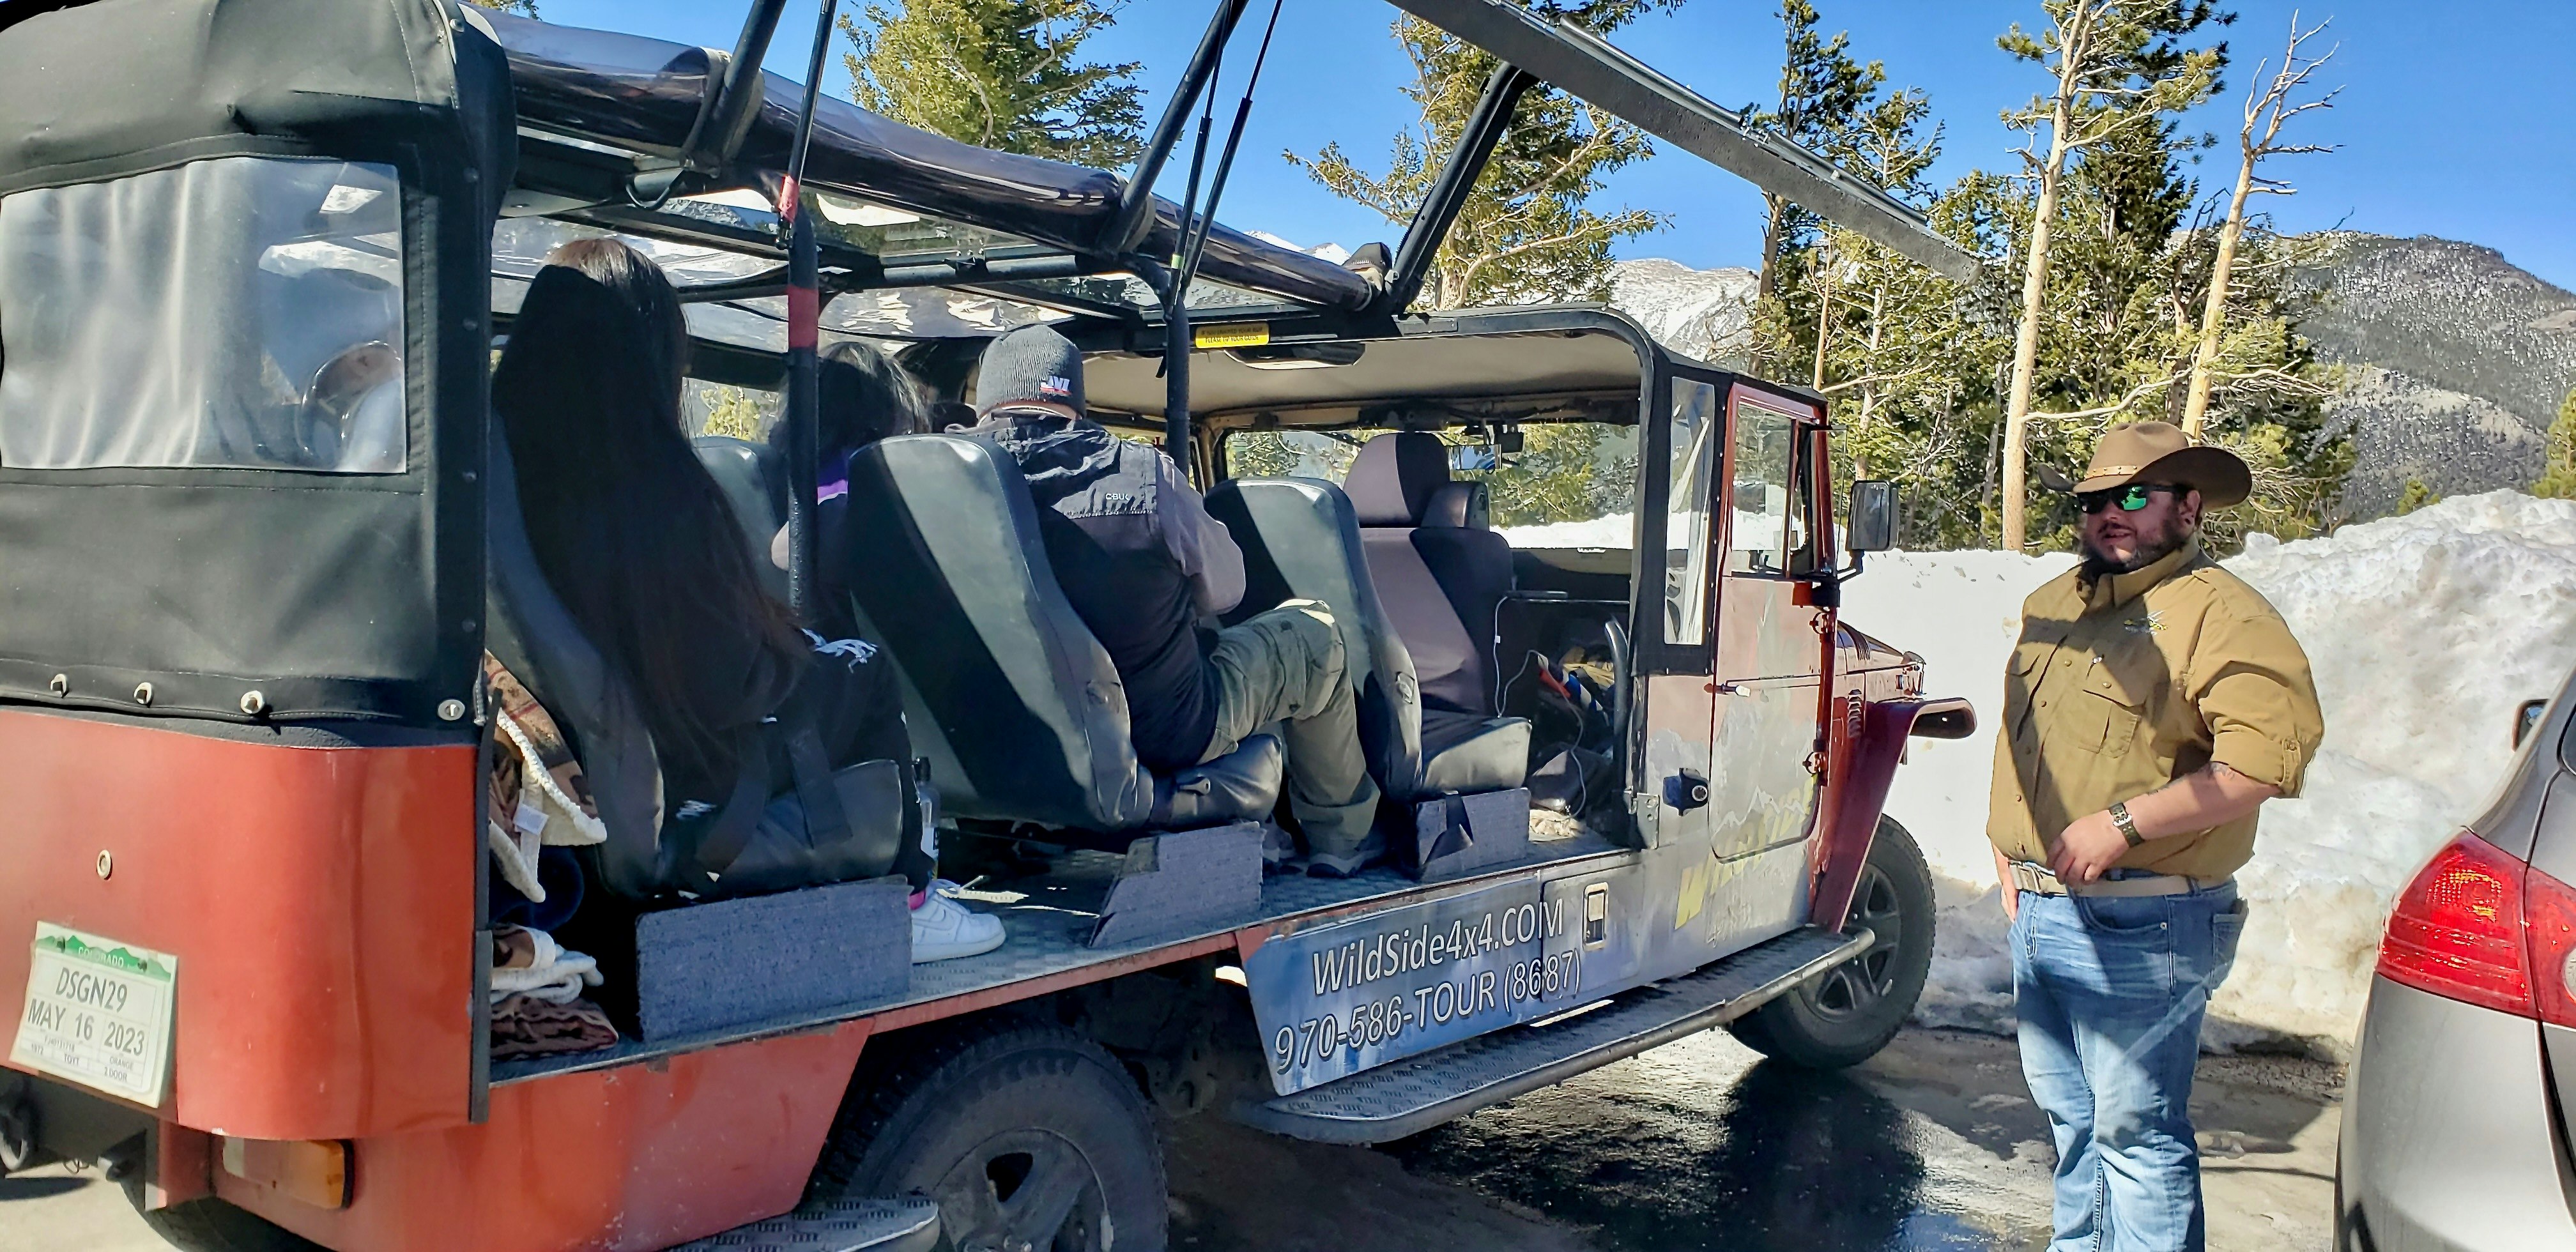 Josh waits patiently for tour participants to board the Wildsides custom designed 4x4 which has clear plastic windows all around for maximum sightline and photography